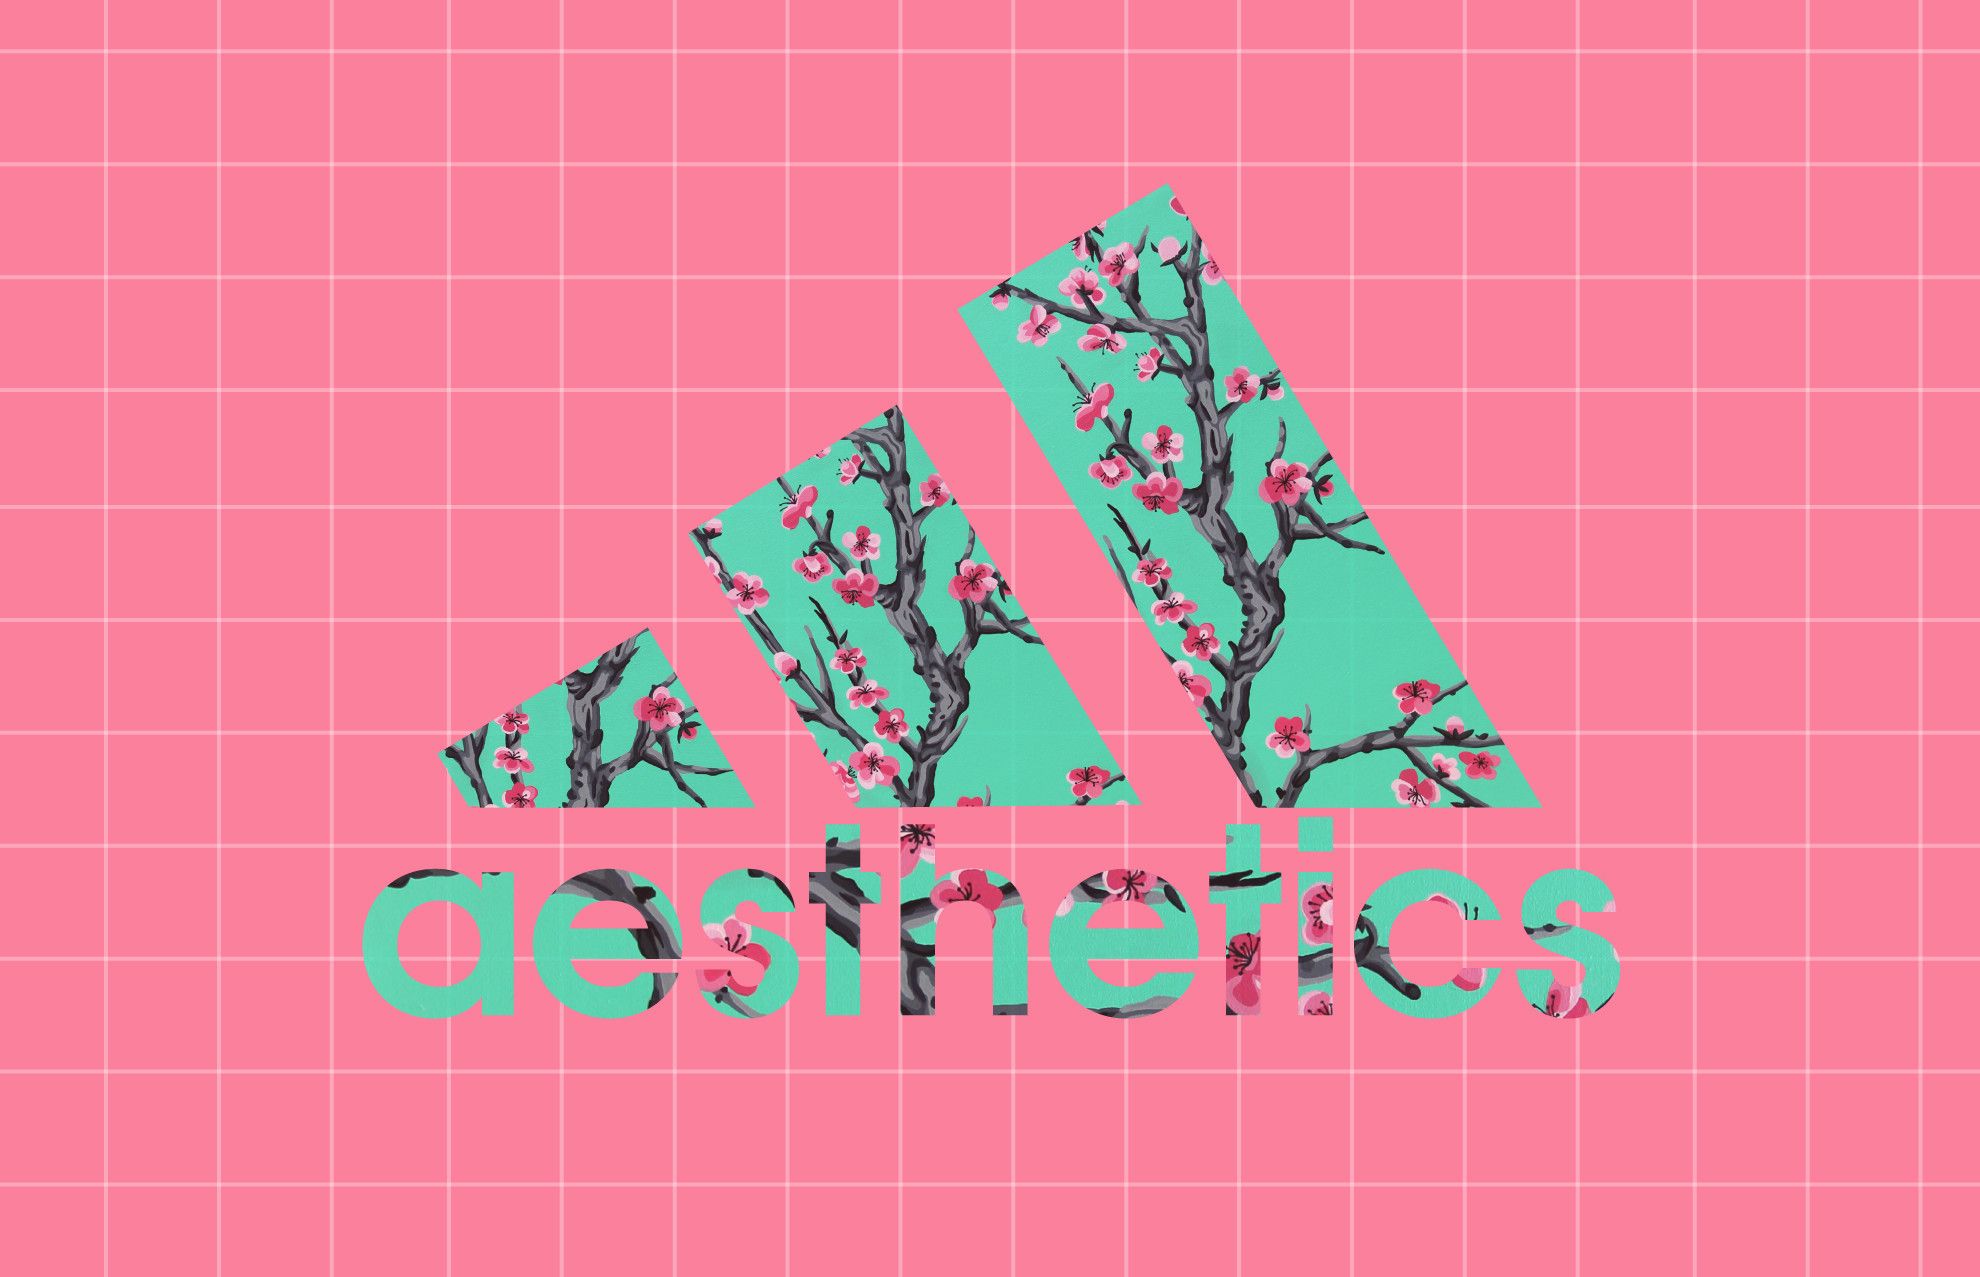 Mobile wallpaper: Adidas, Artistic, Vaporwave, Arizona Iced Tea, 1008021 download the picture for free